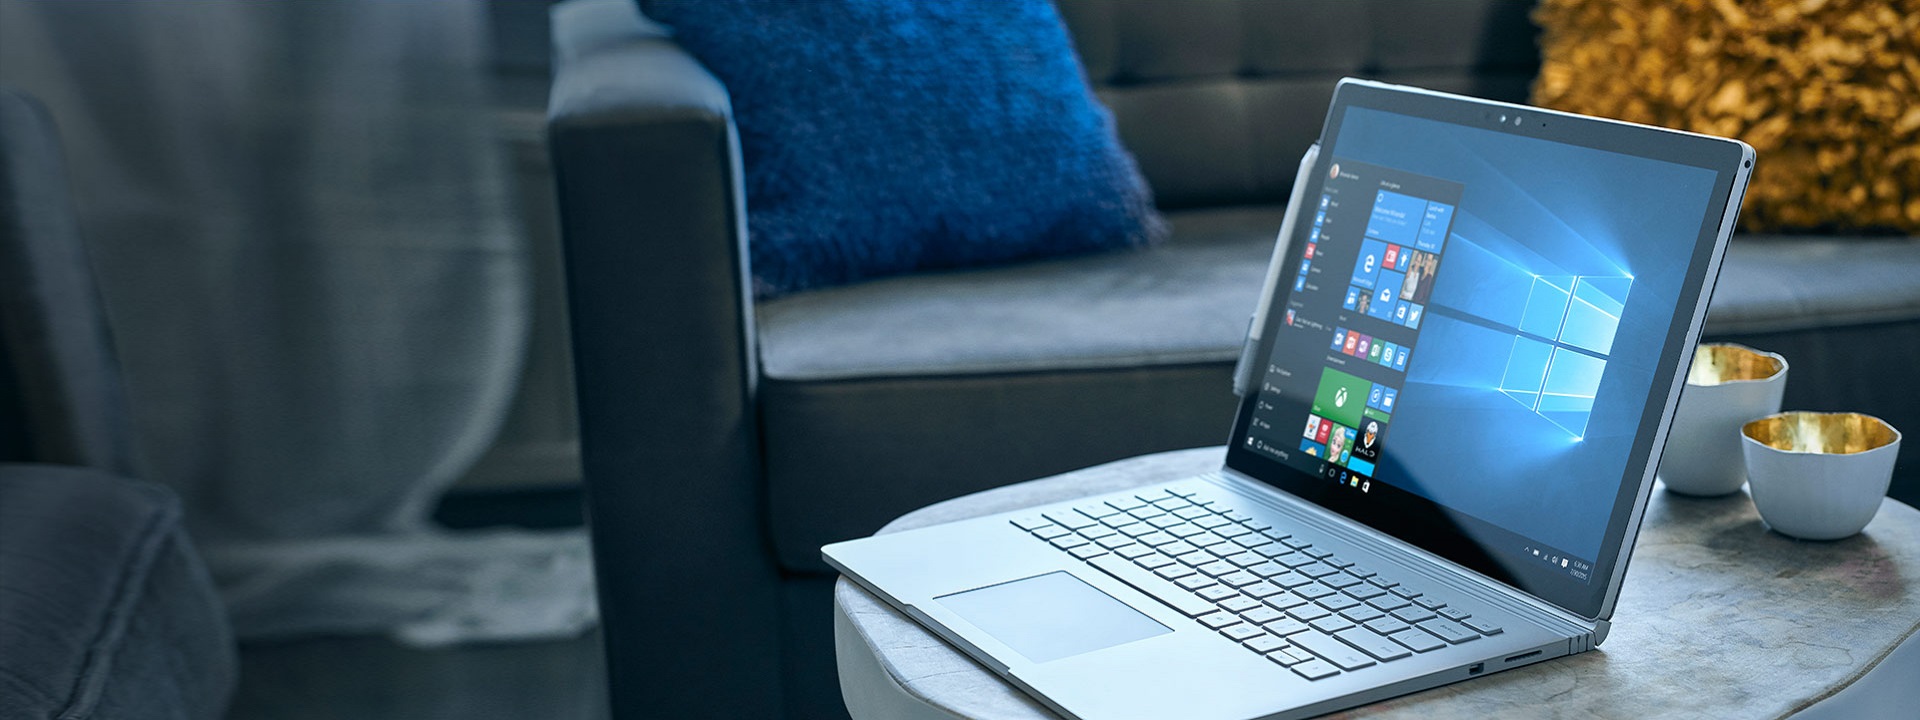 Microsoft Surface Book with Windows 10